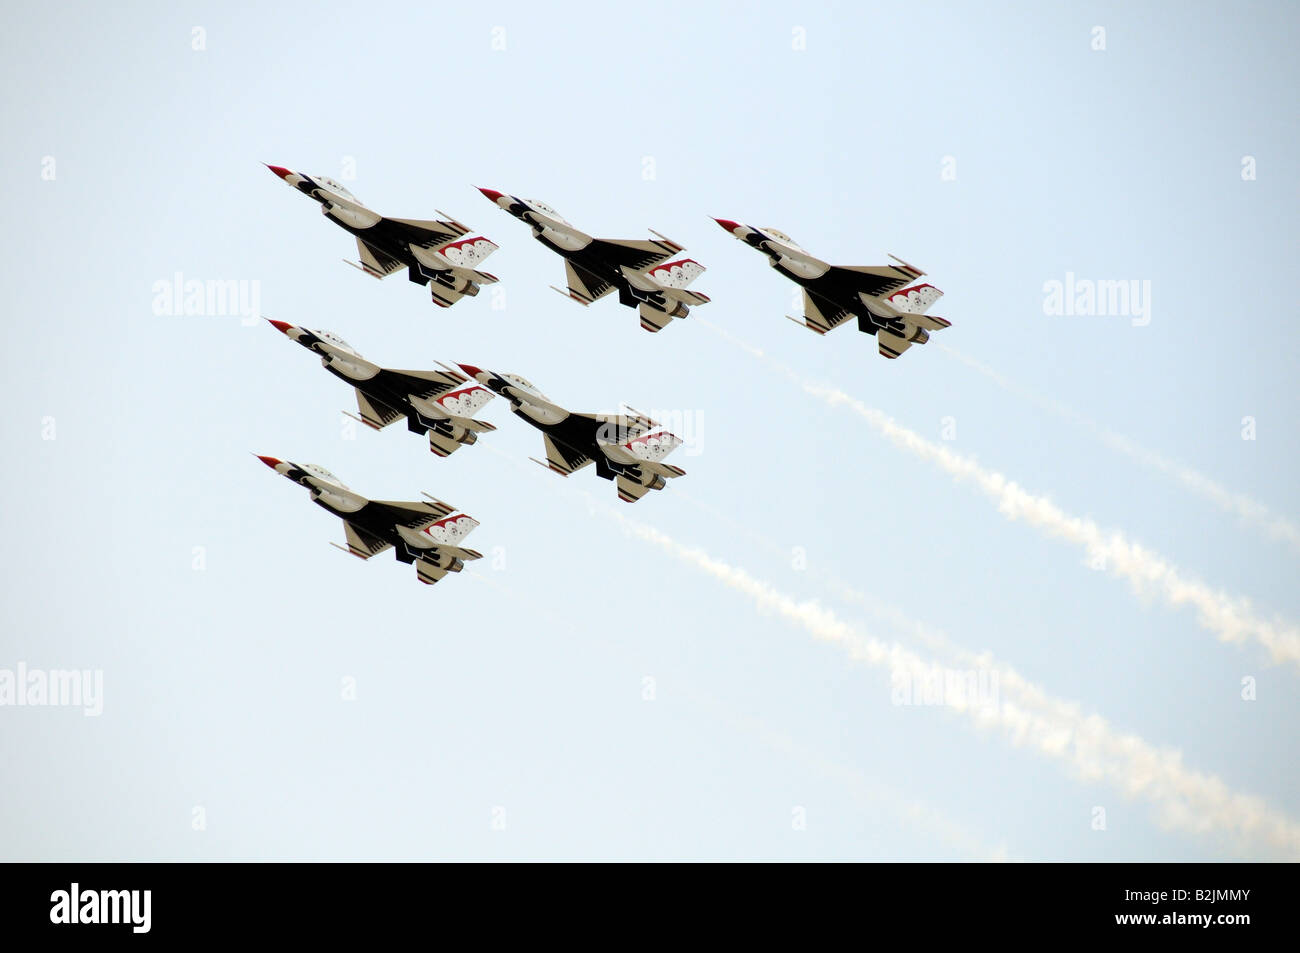 The US Air Force Thunderbirds Air Demonstration Squadron Thunderbirds USAF F-16 jets put on an exhibition in Rochester, NY. USA. Stock Photo